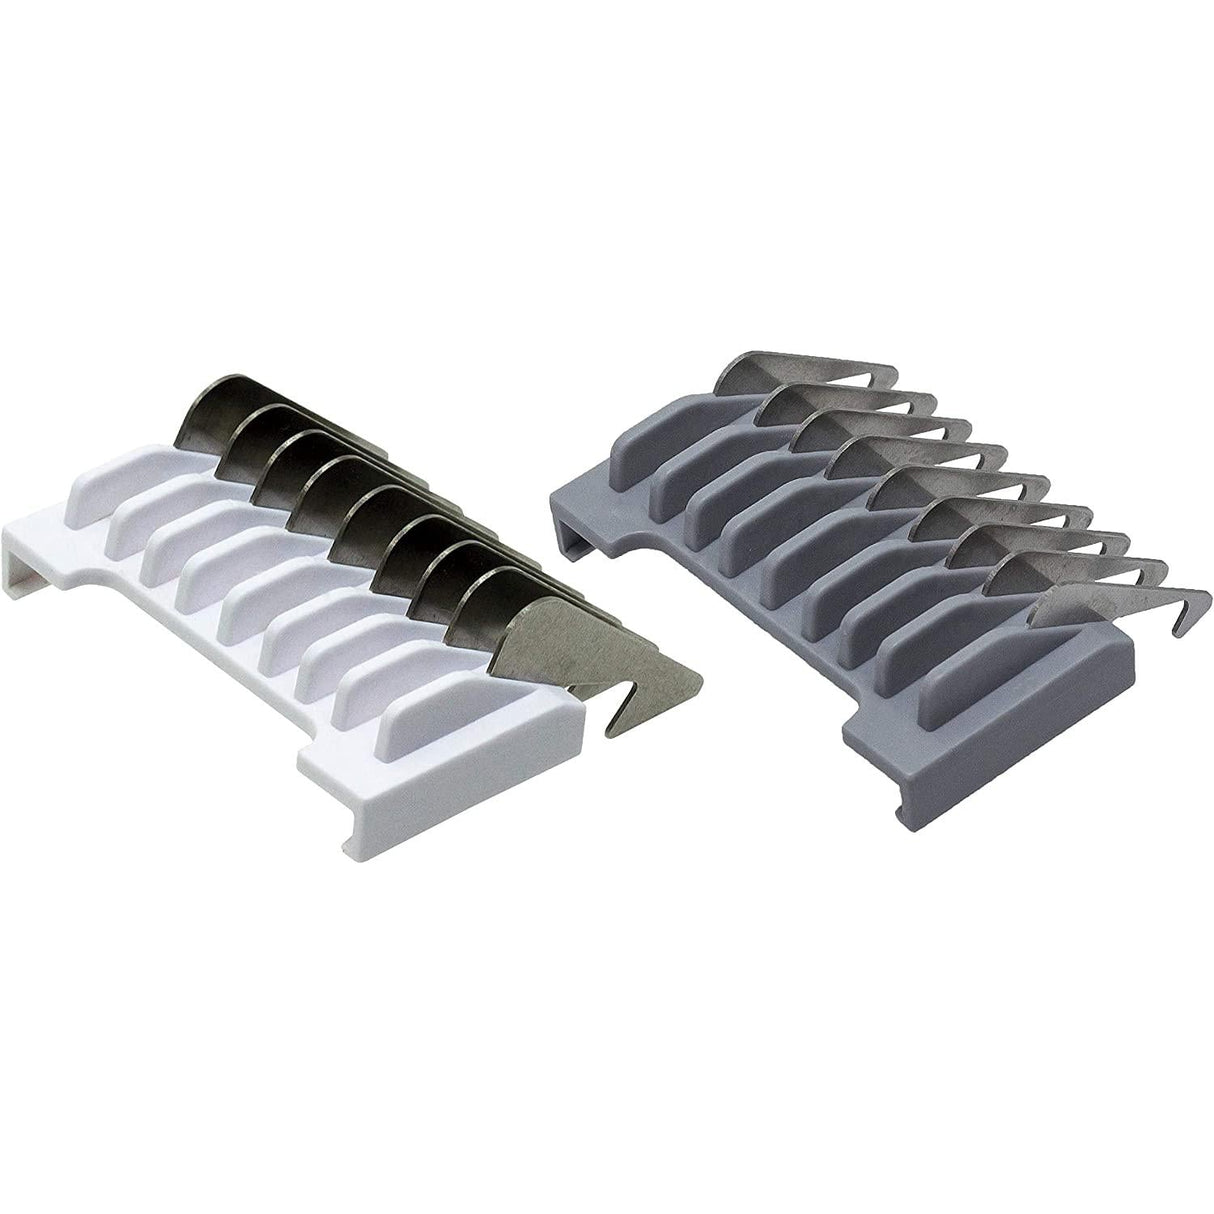 5-in-1 Stainless Steel Slide on Guide Comb 2 Pack